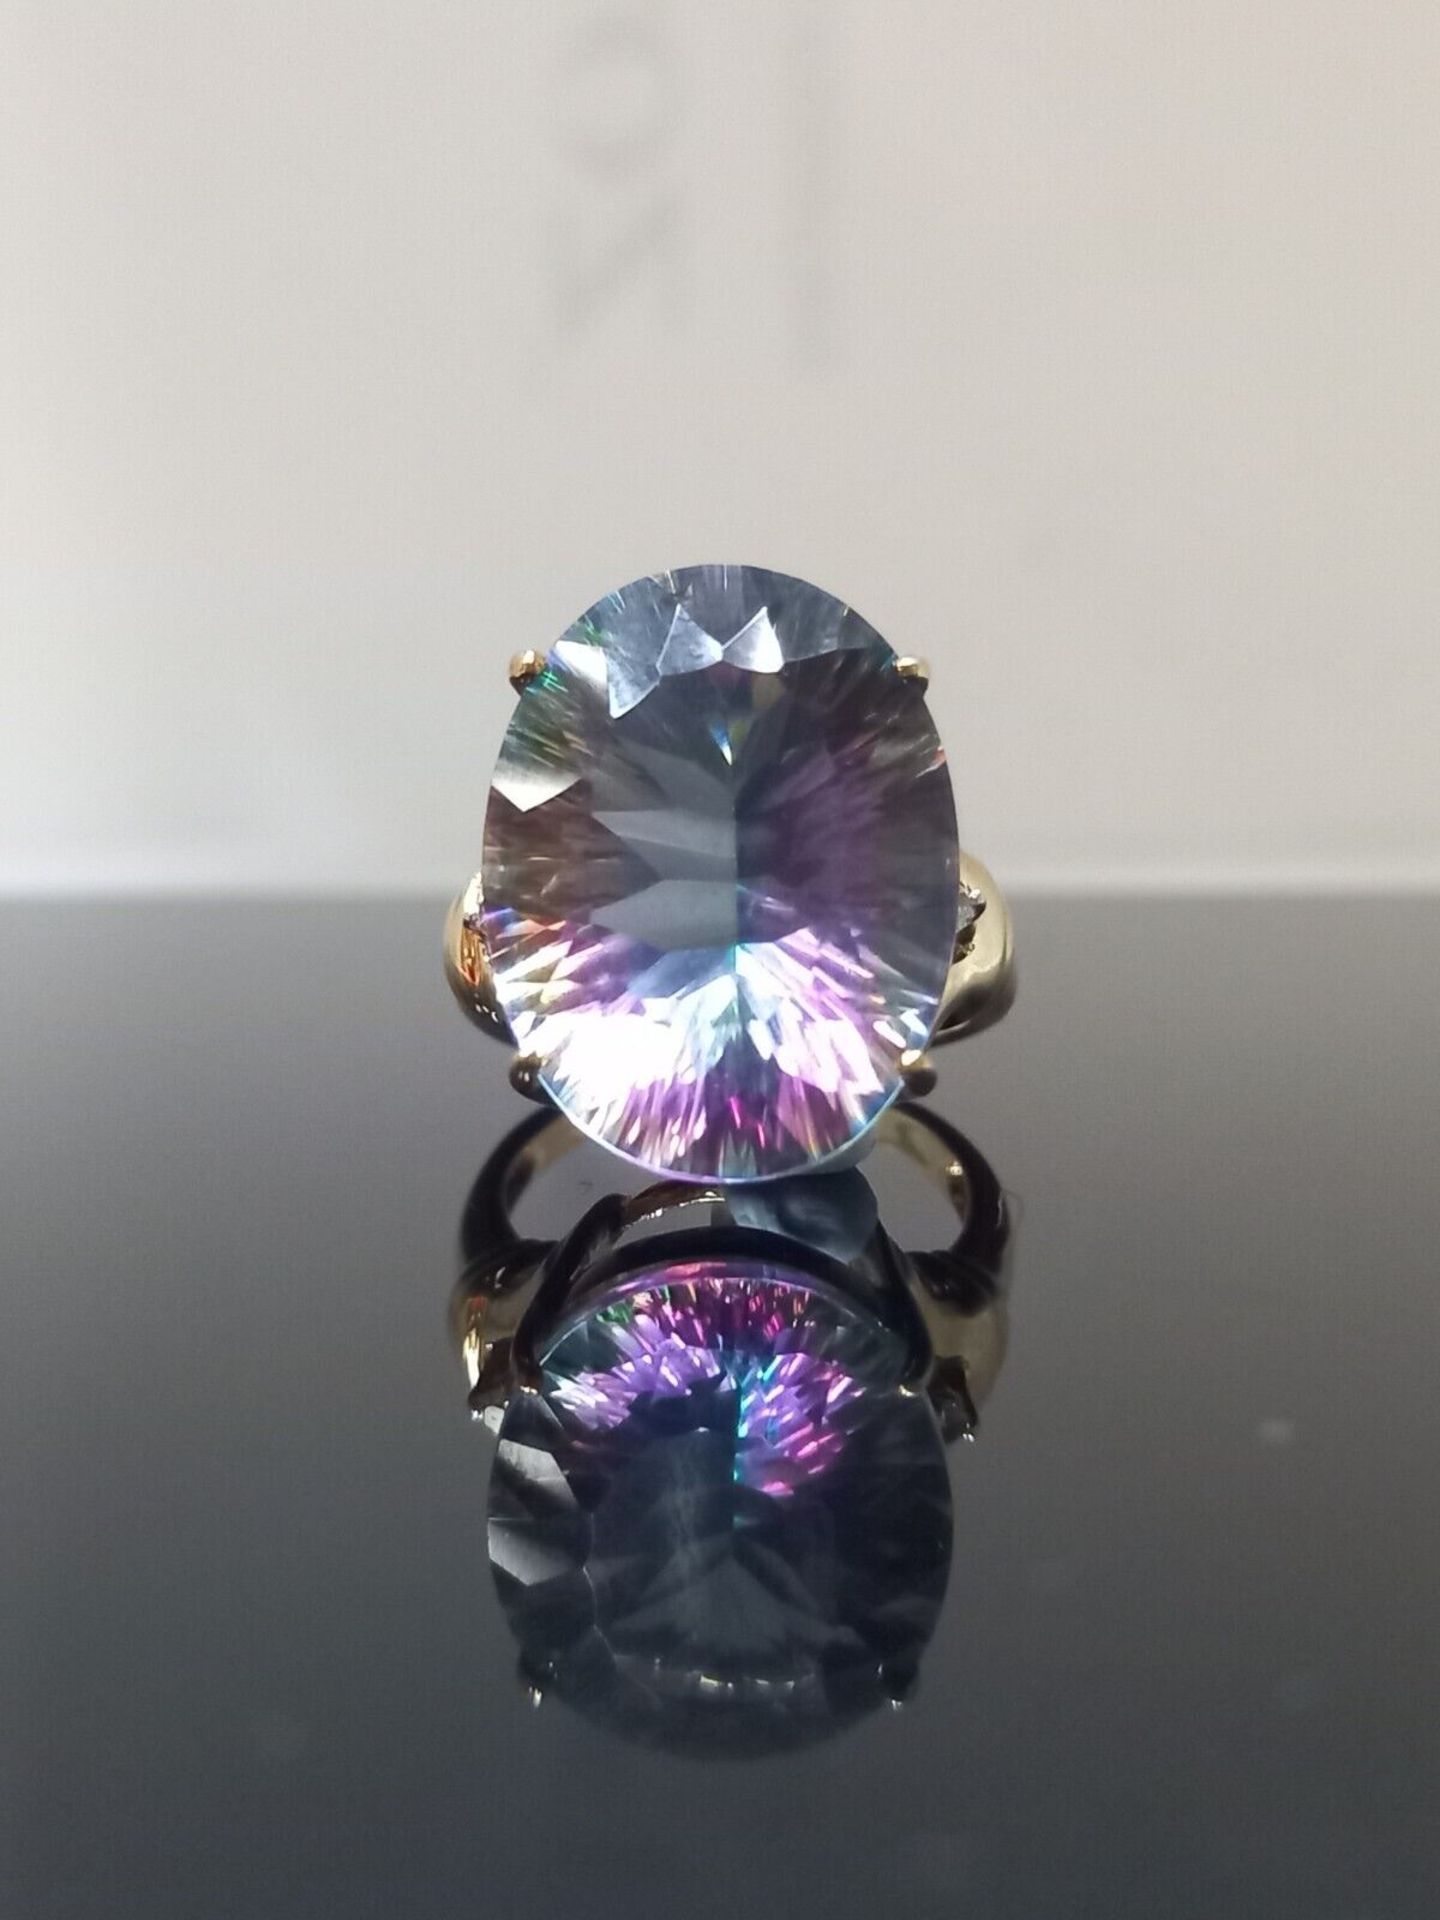 LARGE OVAL MYSTIC TOPAZ & DIAMOND GOLD RING/YELLOW GOLD - Image 3 of 6